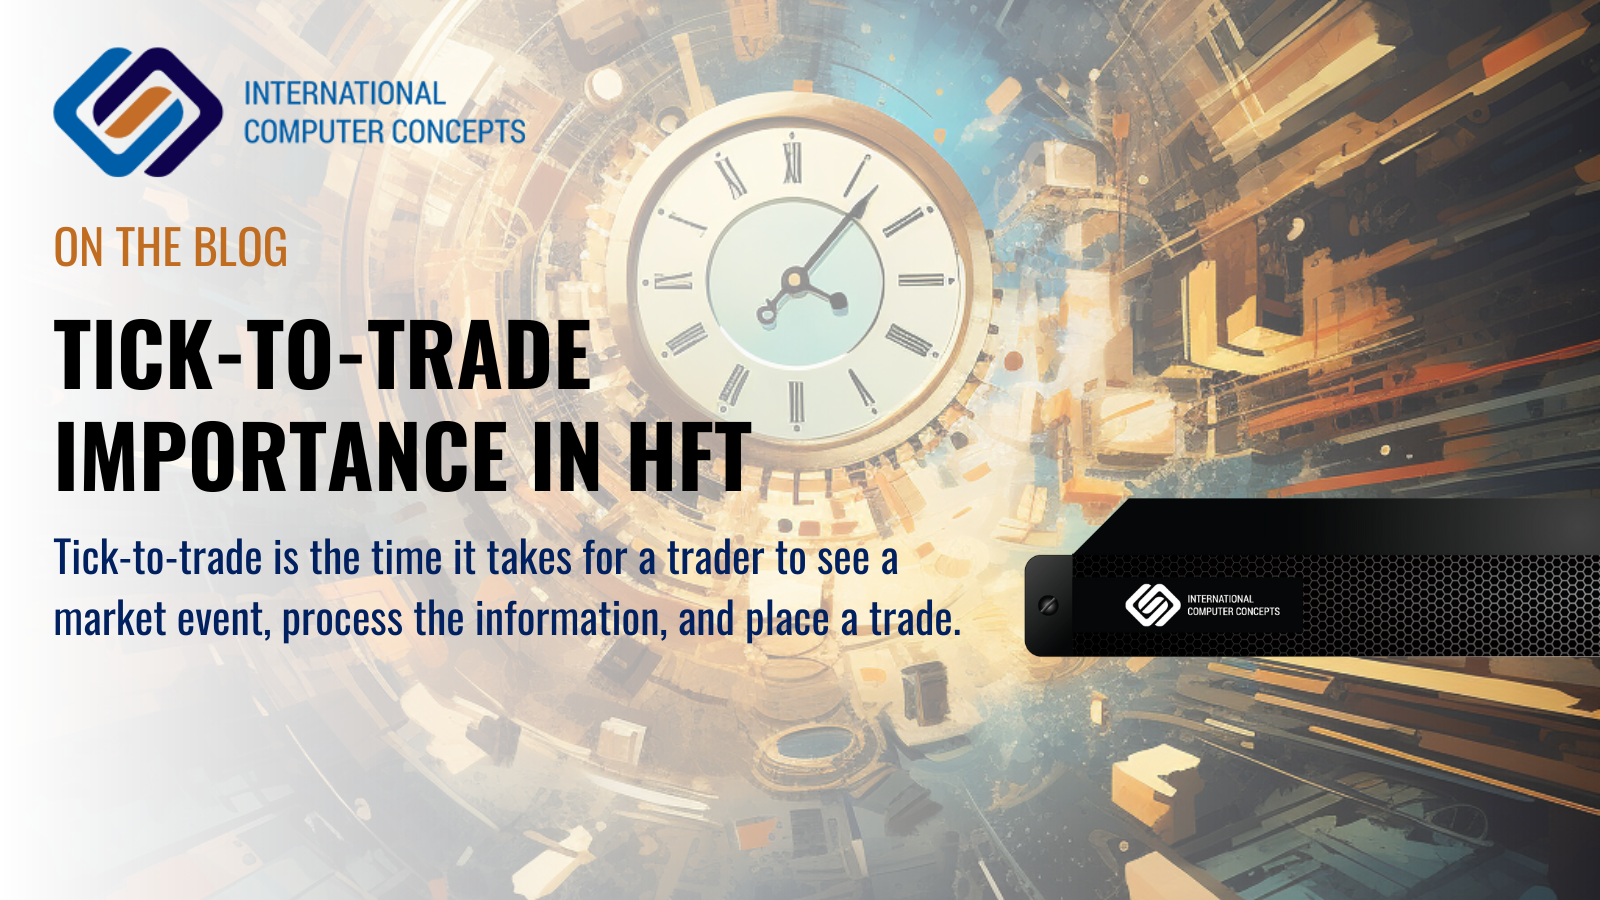 Tick-to-trade importance in HFT